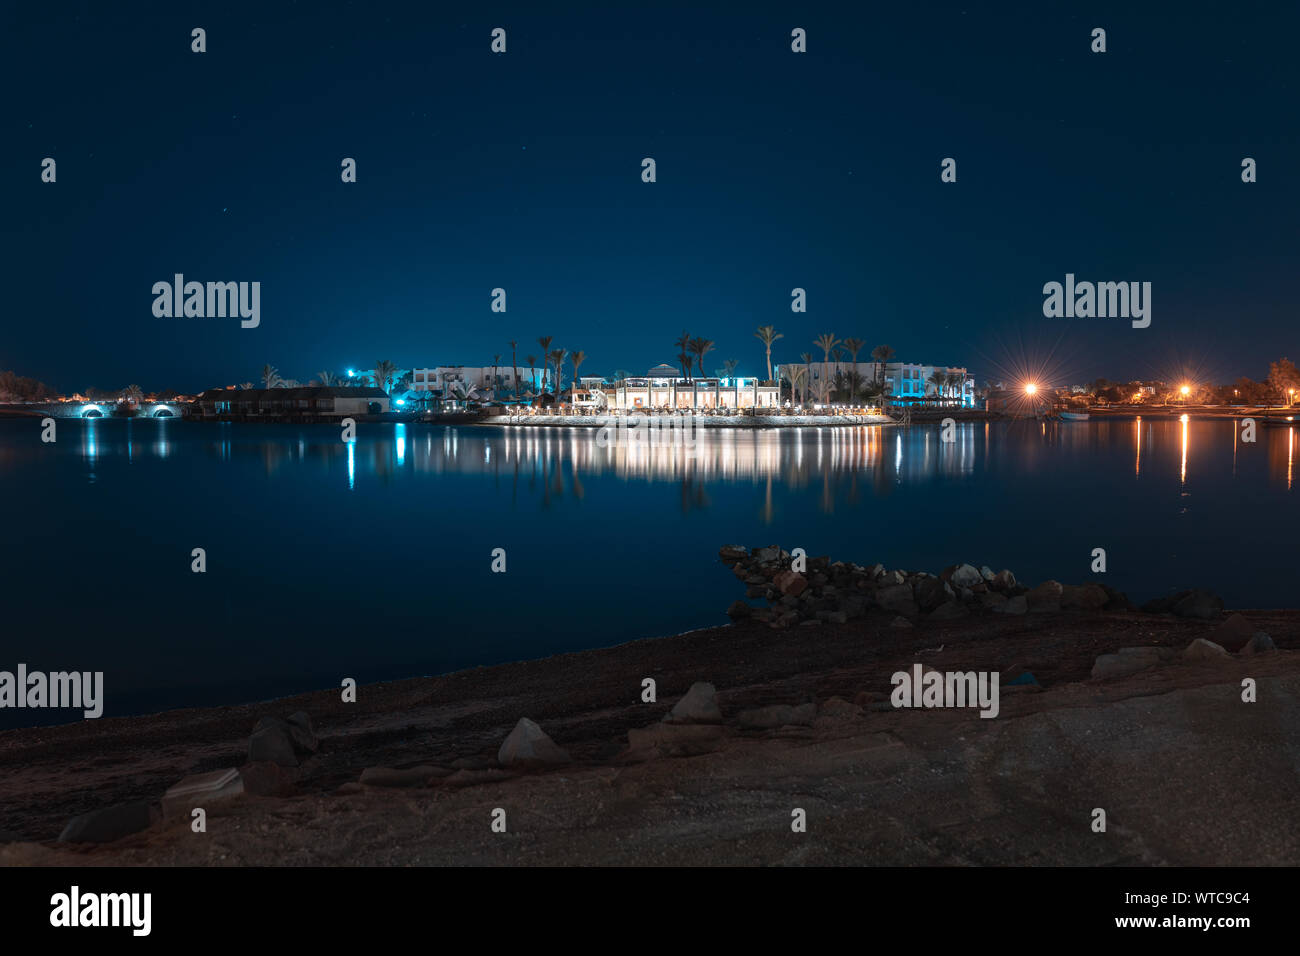 long time exposure of El gouna lagoon with a view of a hotel in the night. Stock Photo